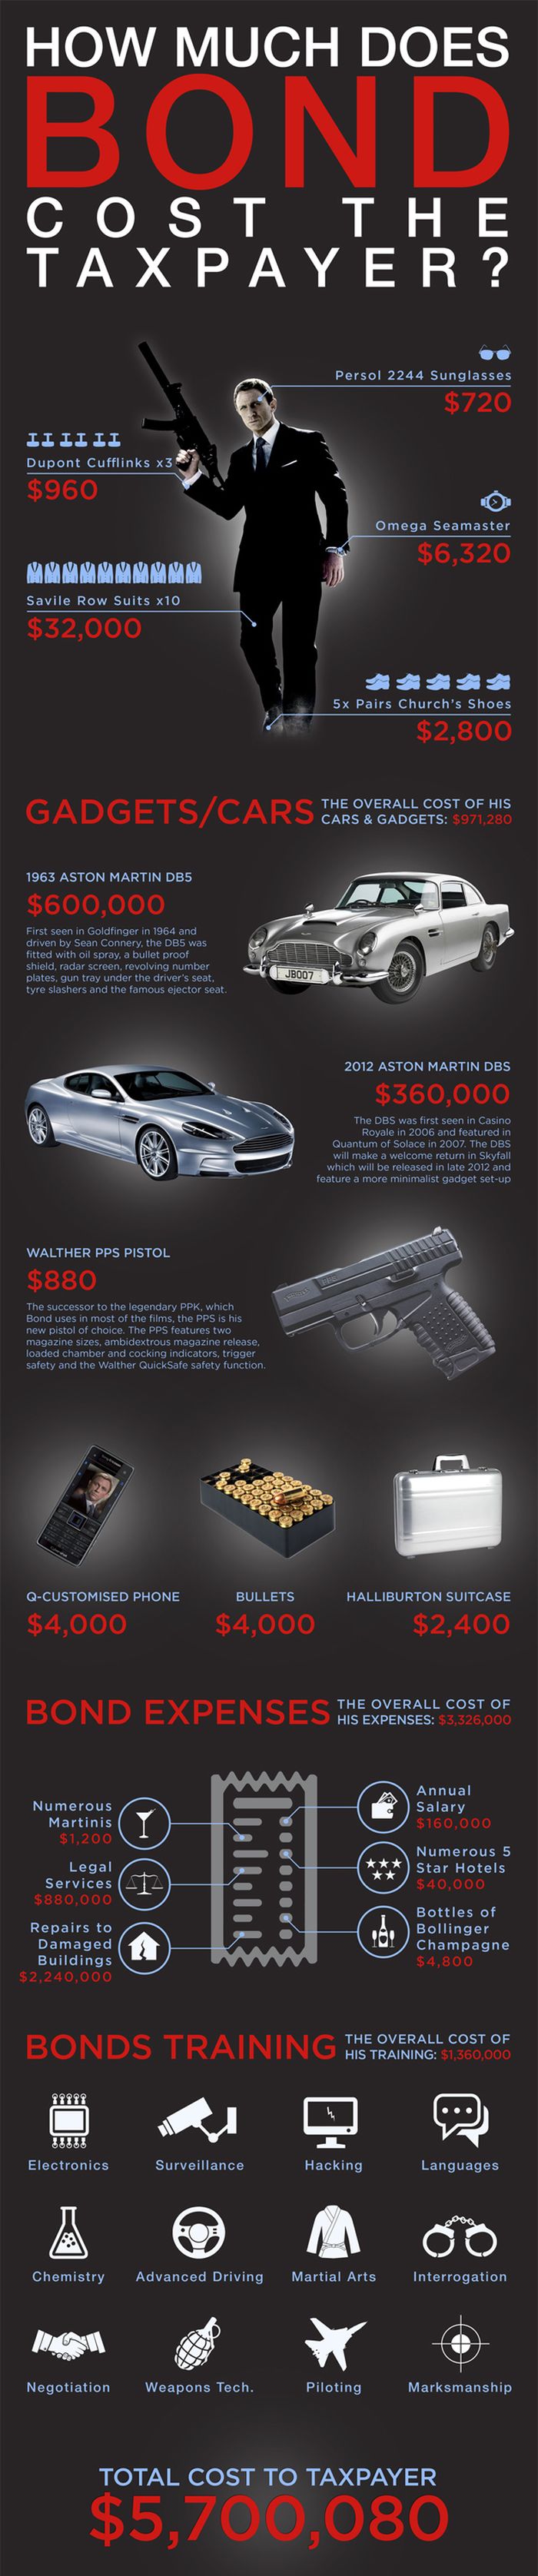 How Much Does James Bond Cost The Taxpayer? (infographic)